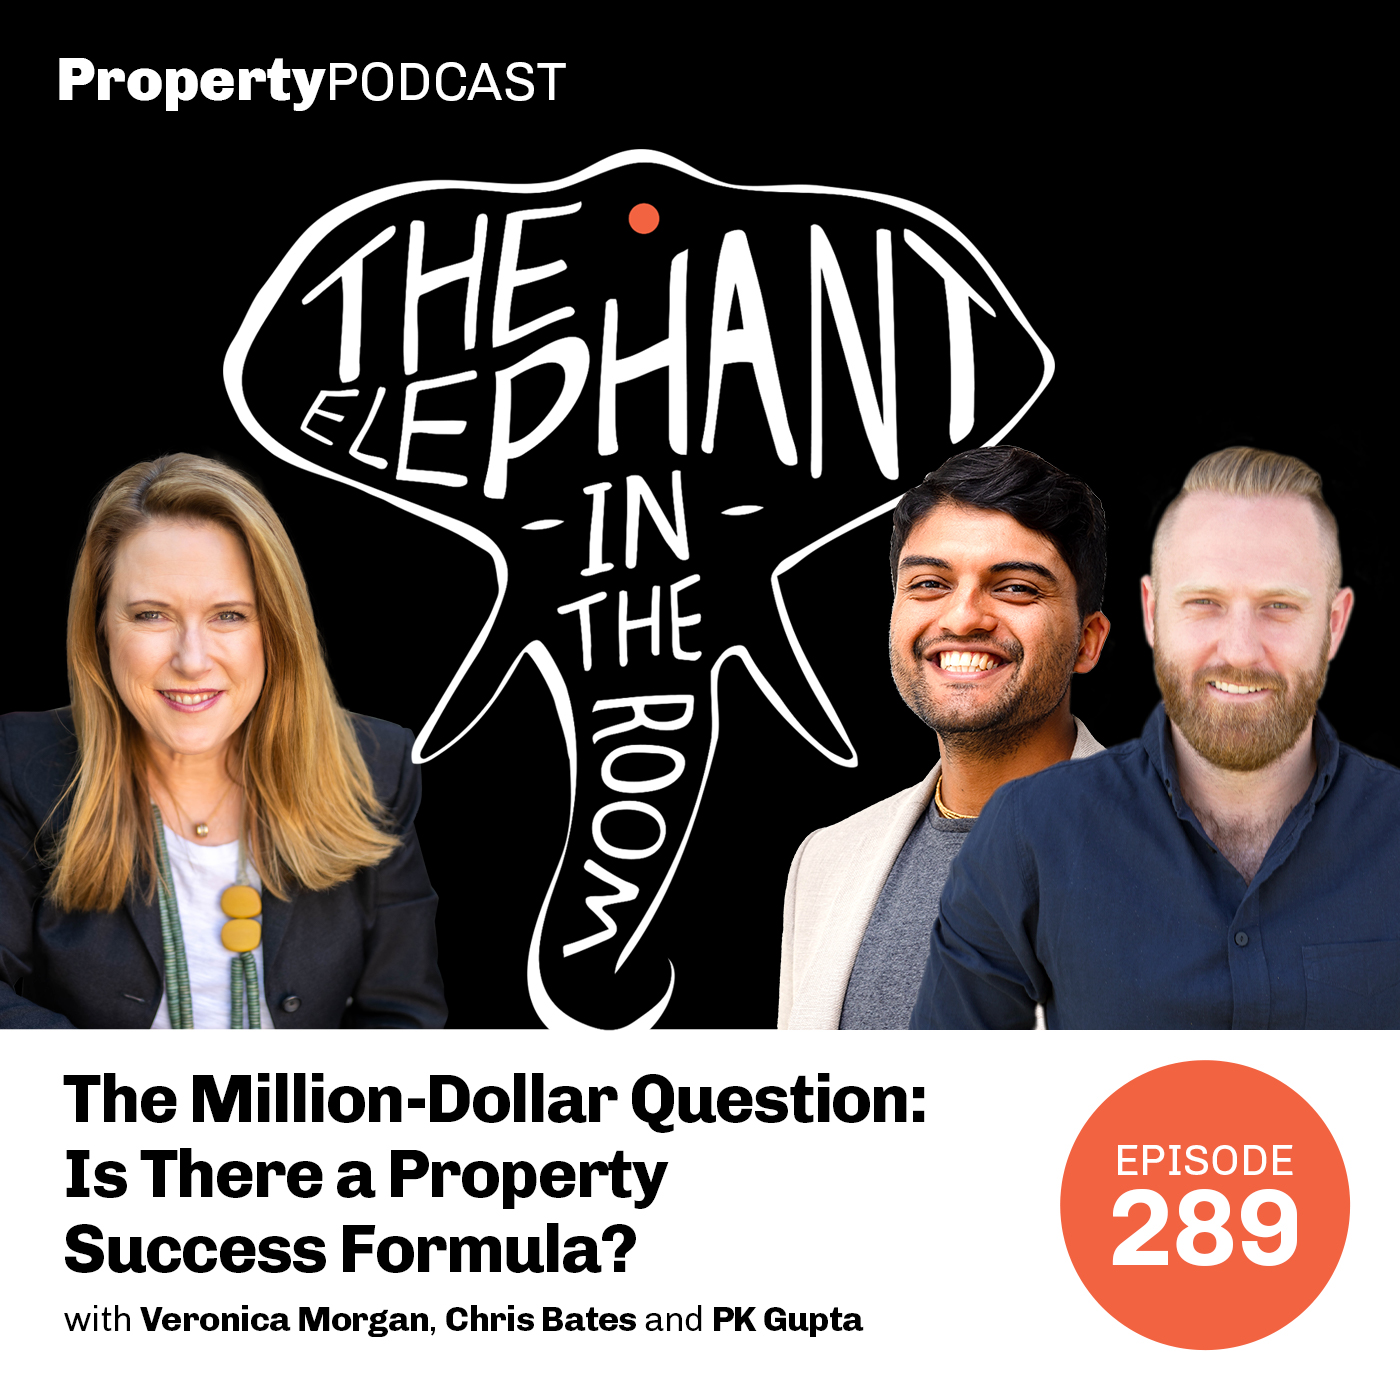 The Million-Dollar Question: Is There a Property Success Formula?